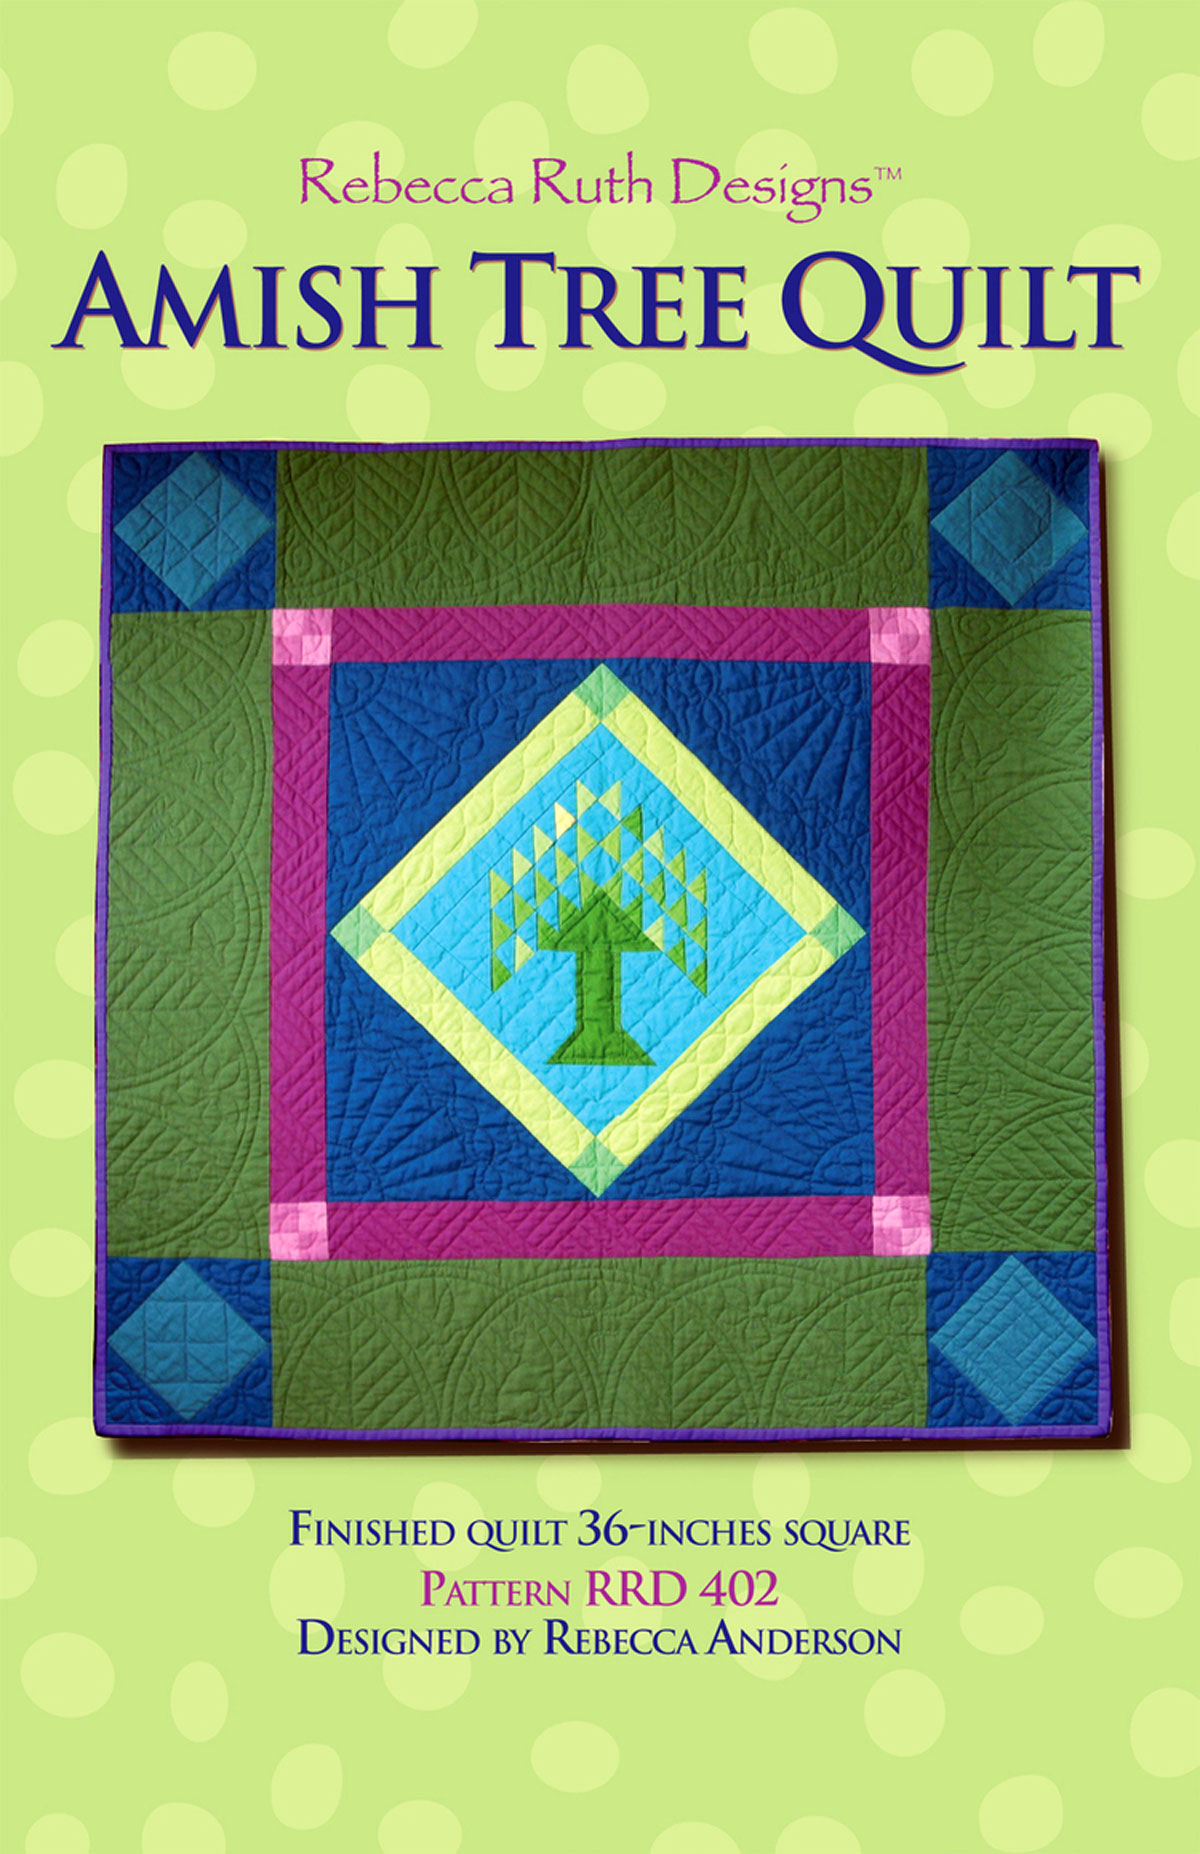 Amish-Tree-quilt-sewing-pattern-rebecca-ruth-designs-front